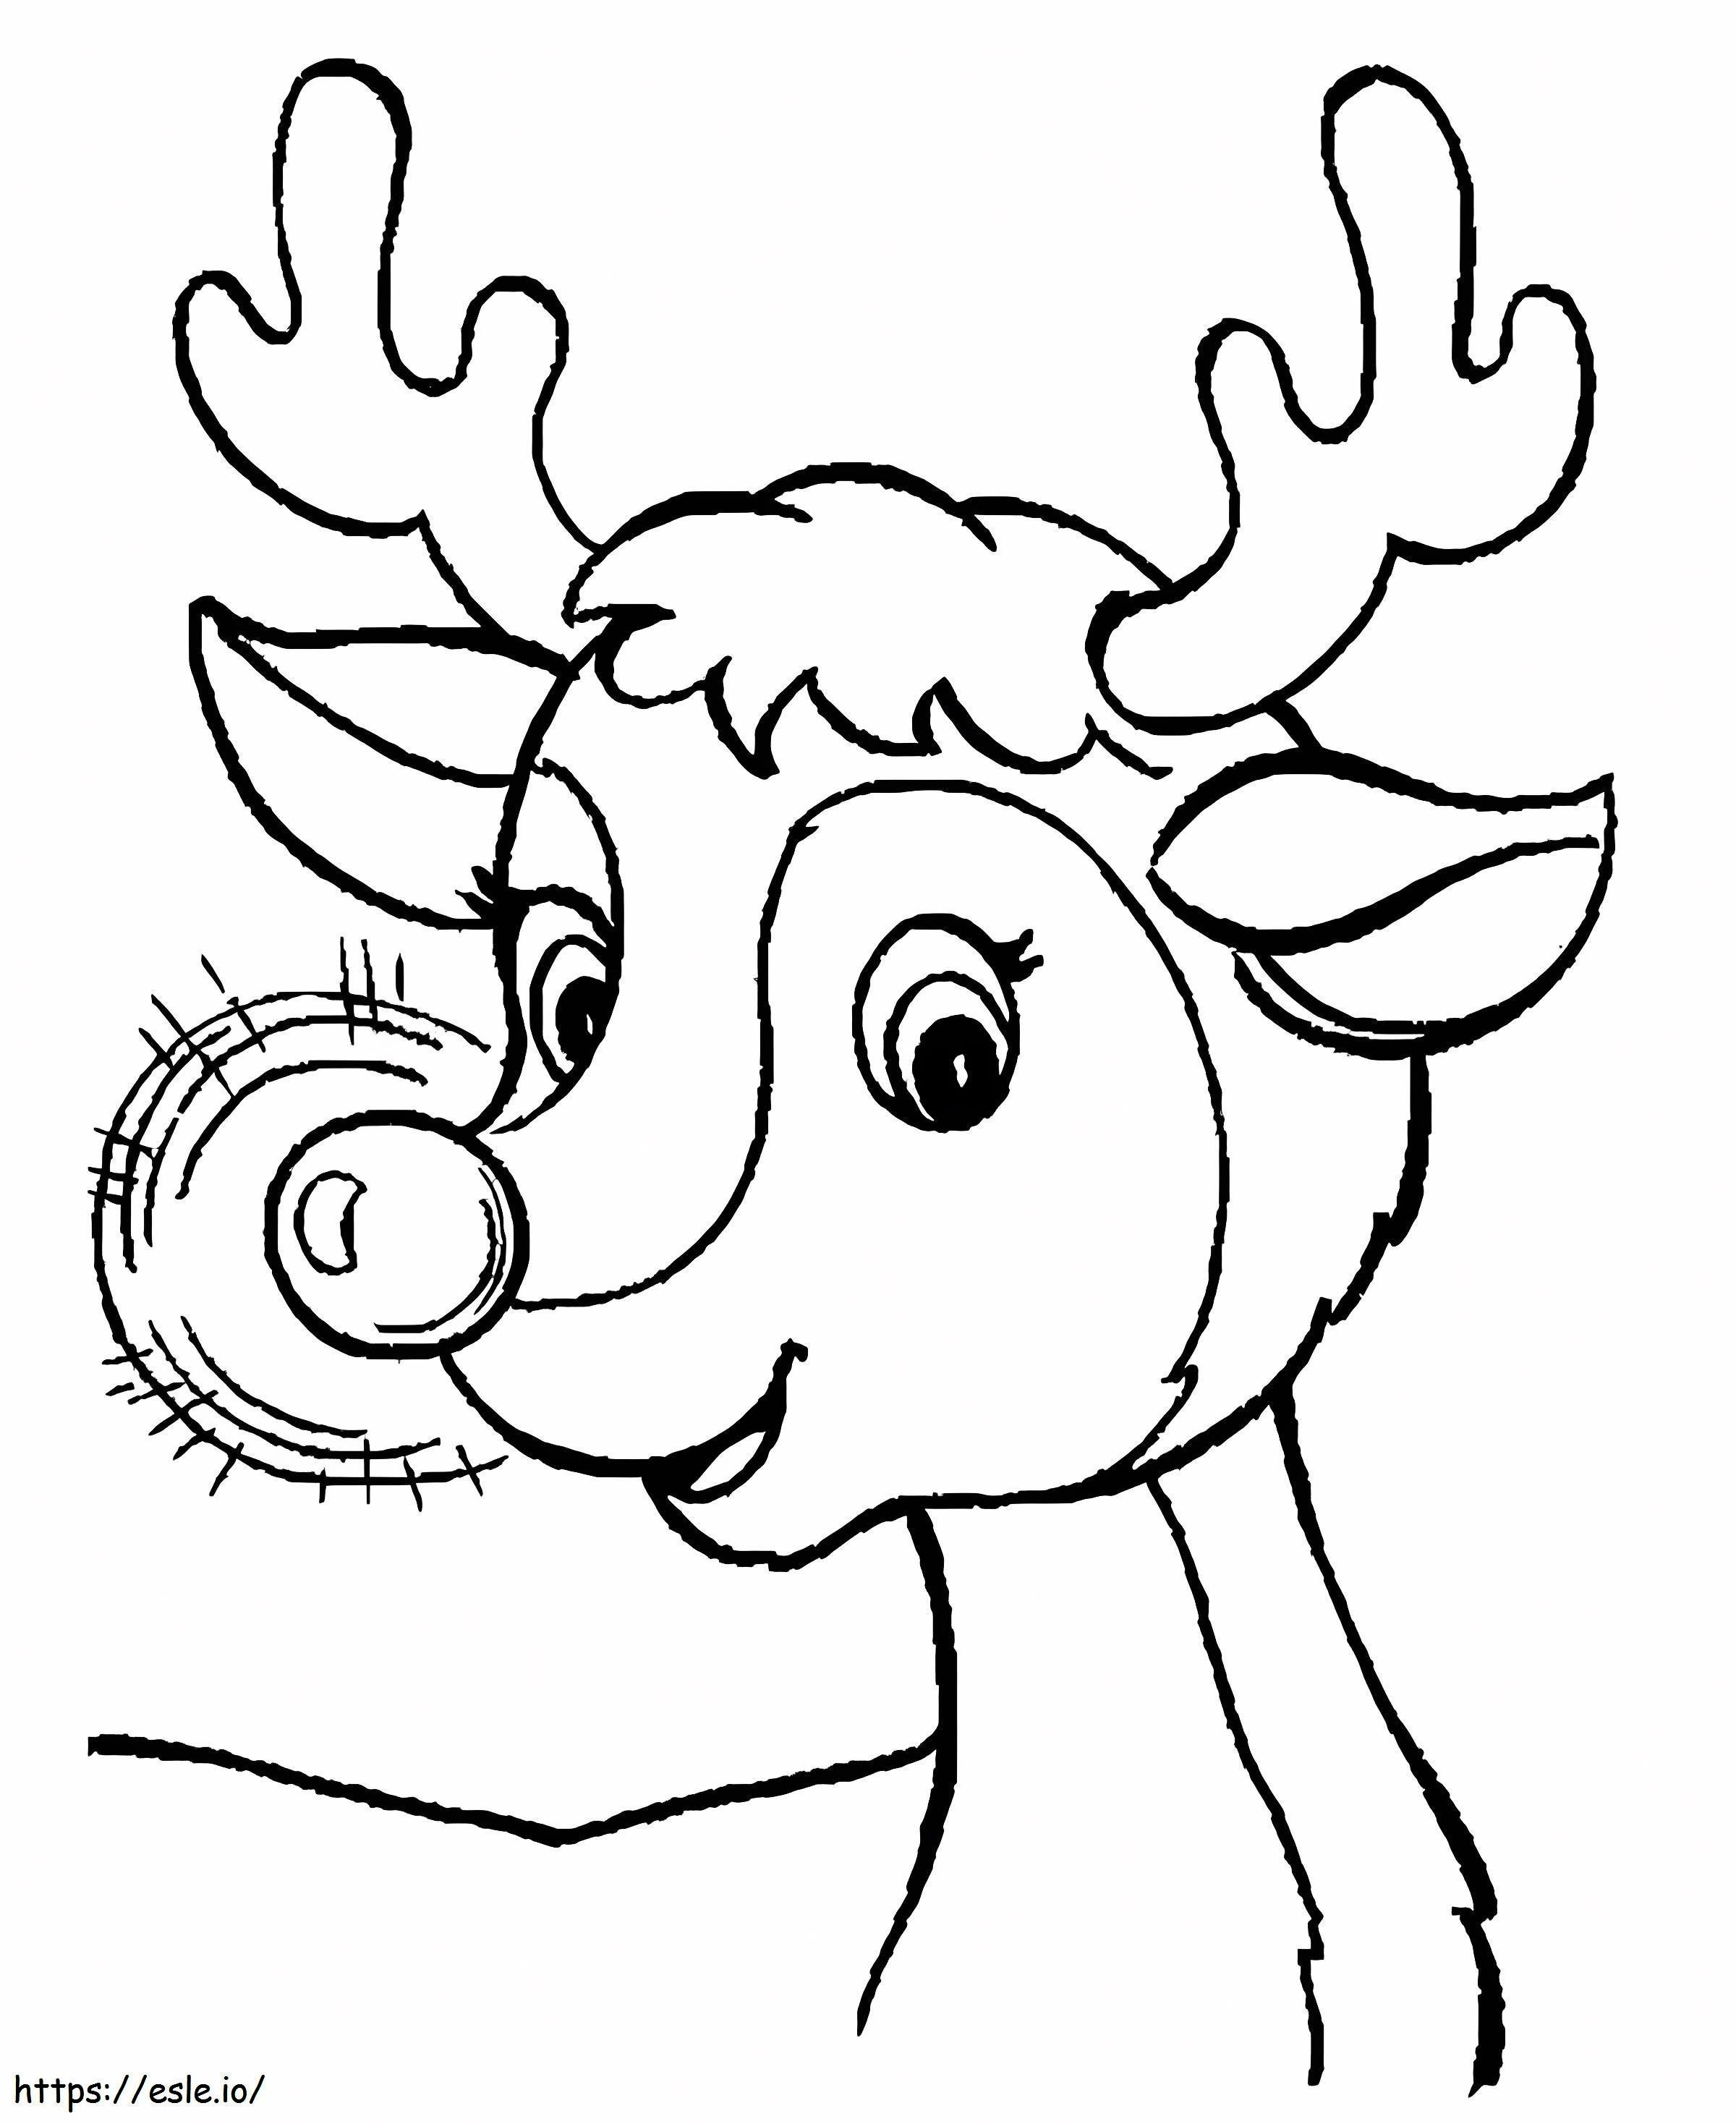 Rudolph'S Car coloring page